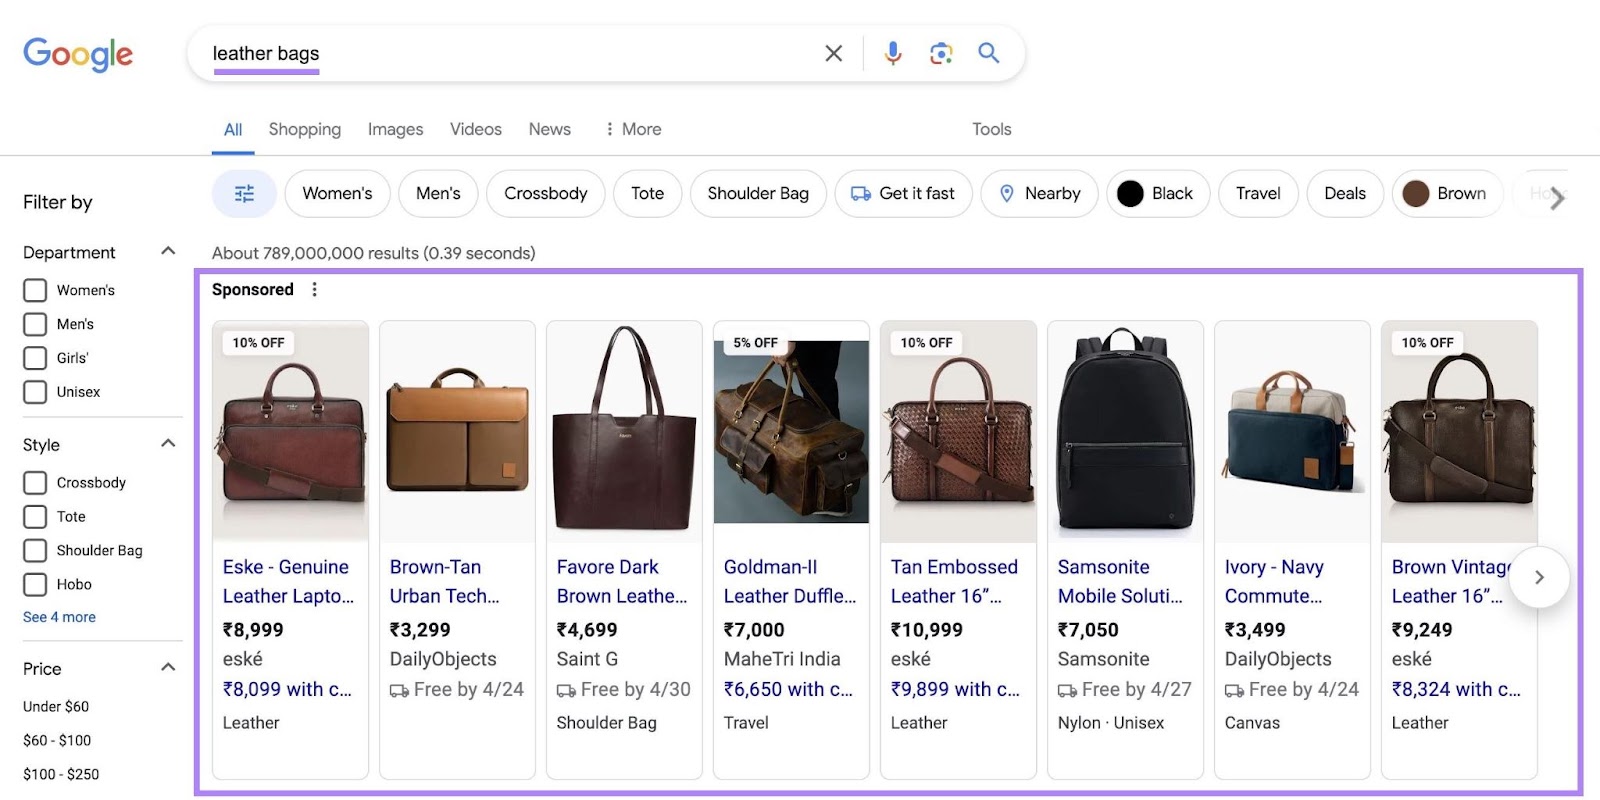 Google Shopping results for "leather bags" showing sponsored ads as the top results.